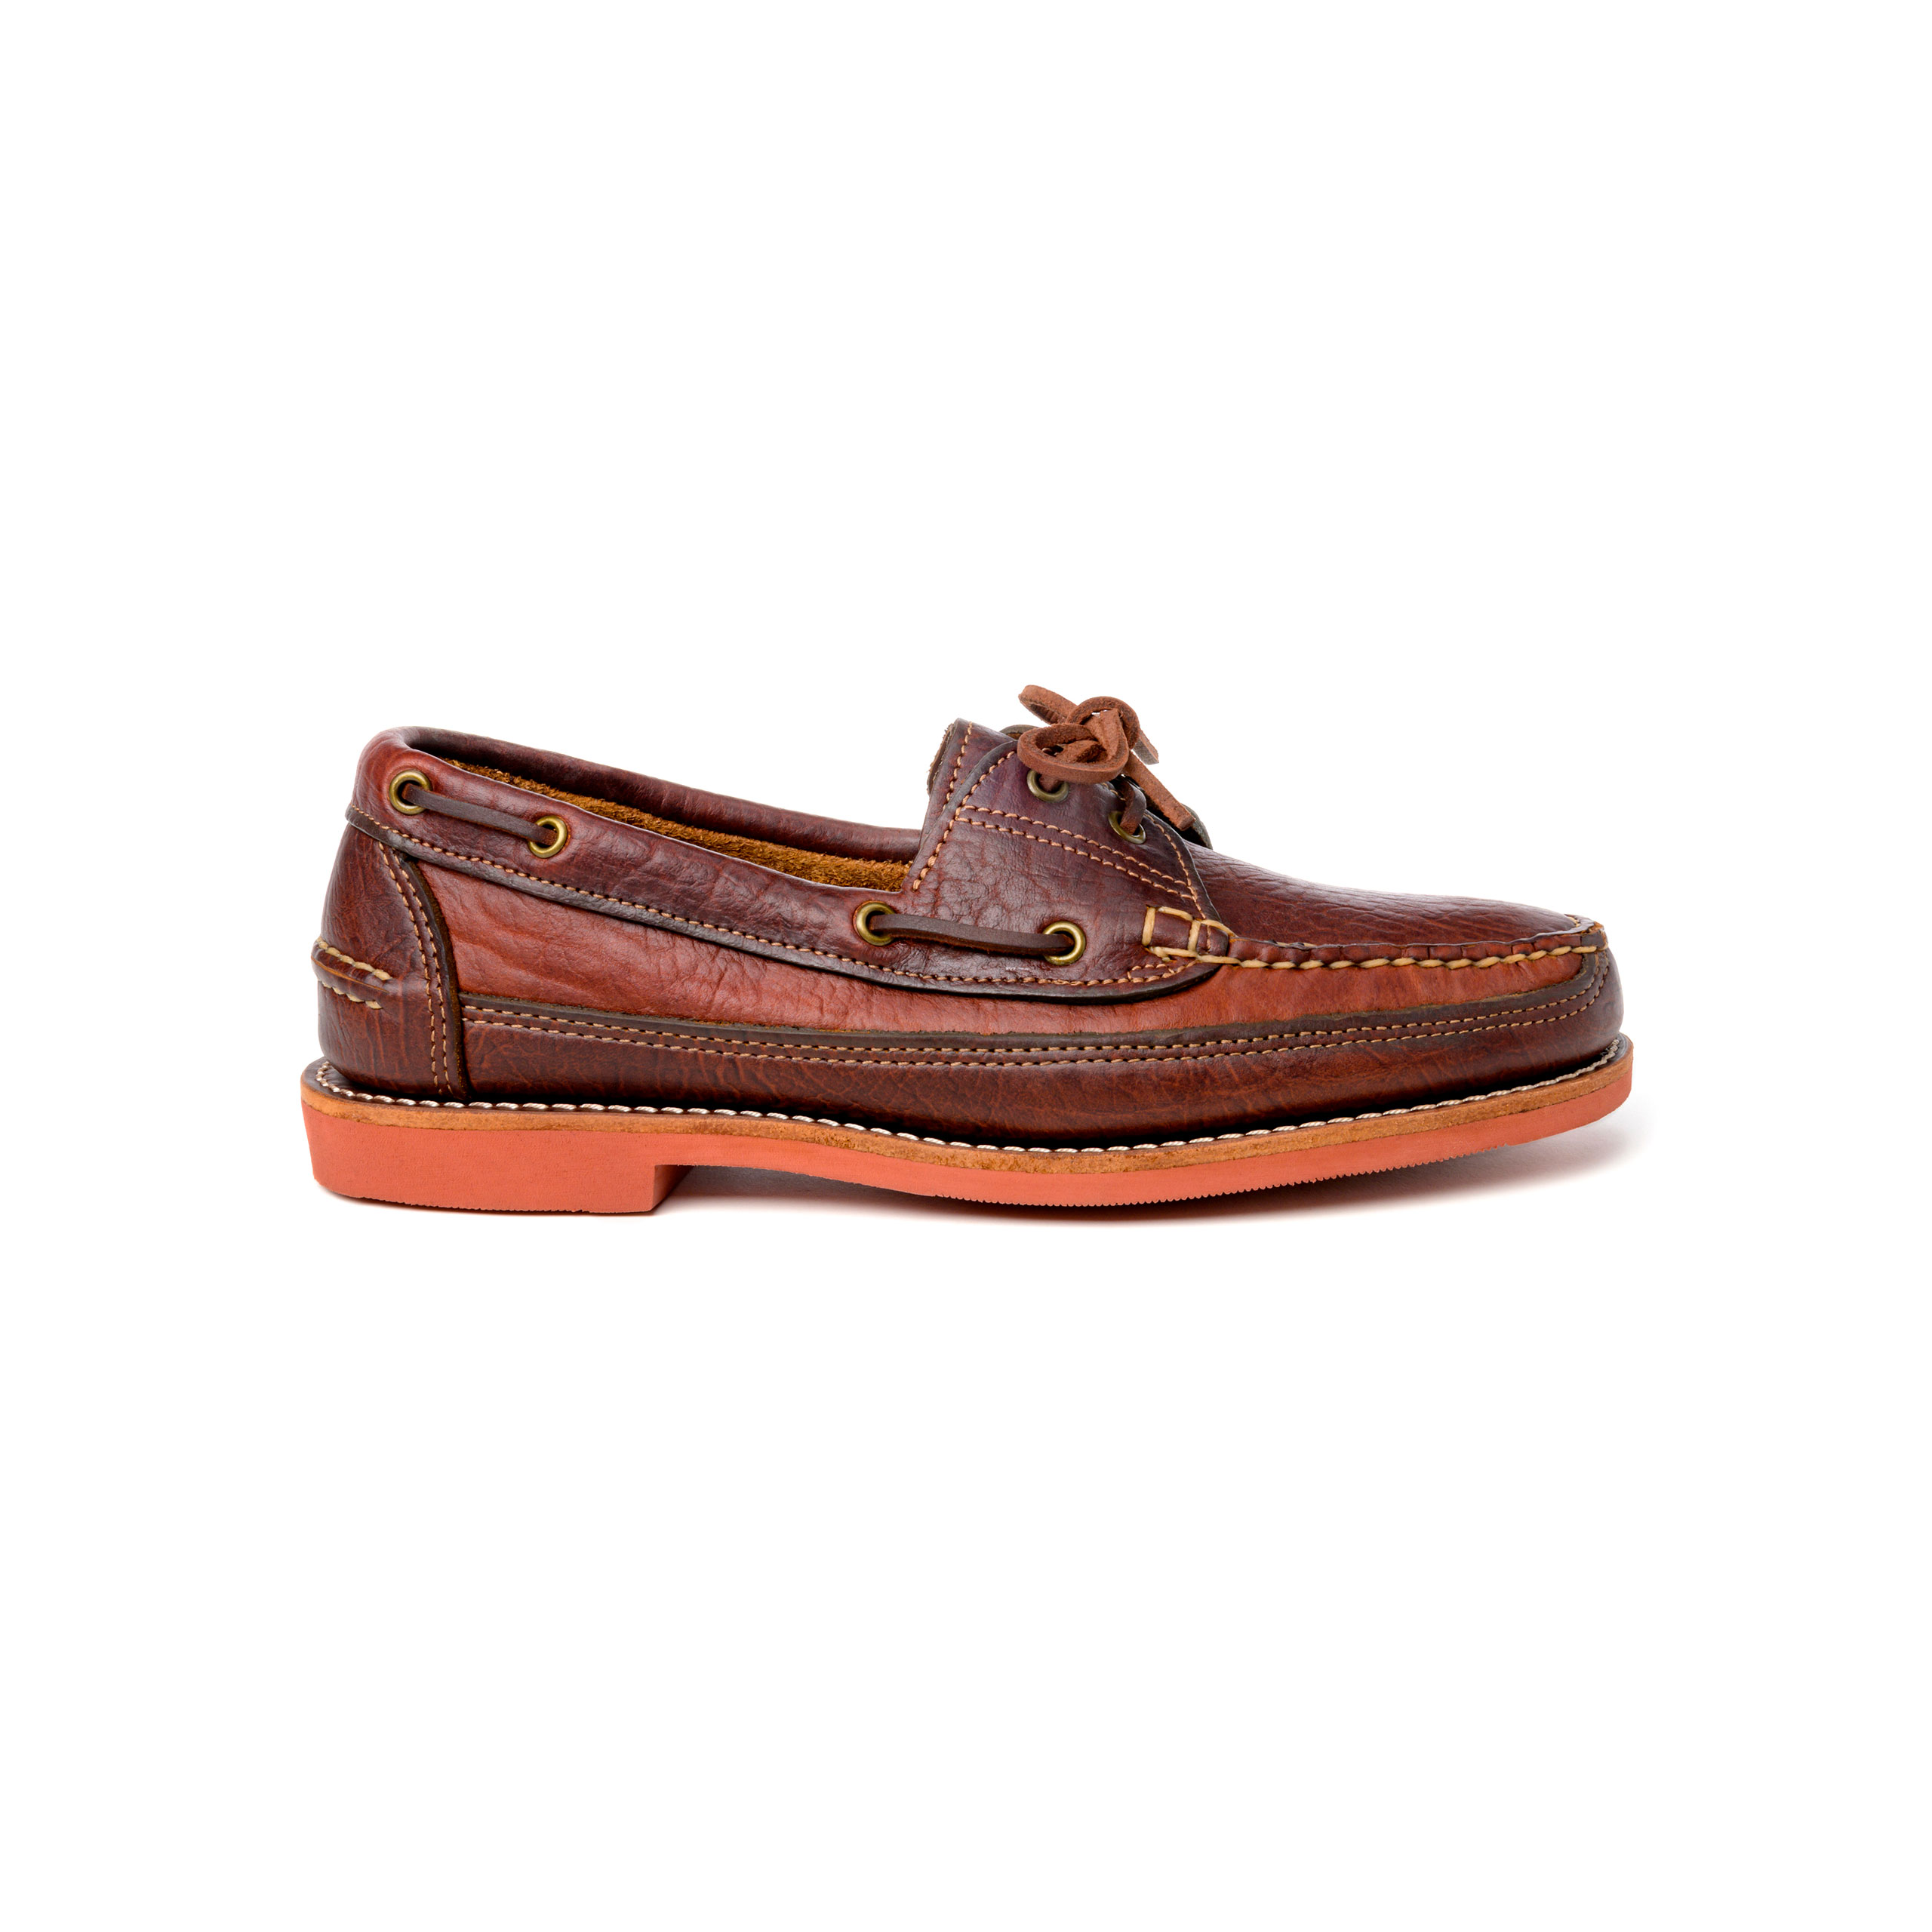 Bison Leather Camp Moccasin – Gokey USA